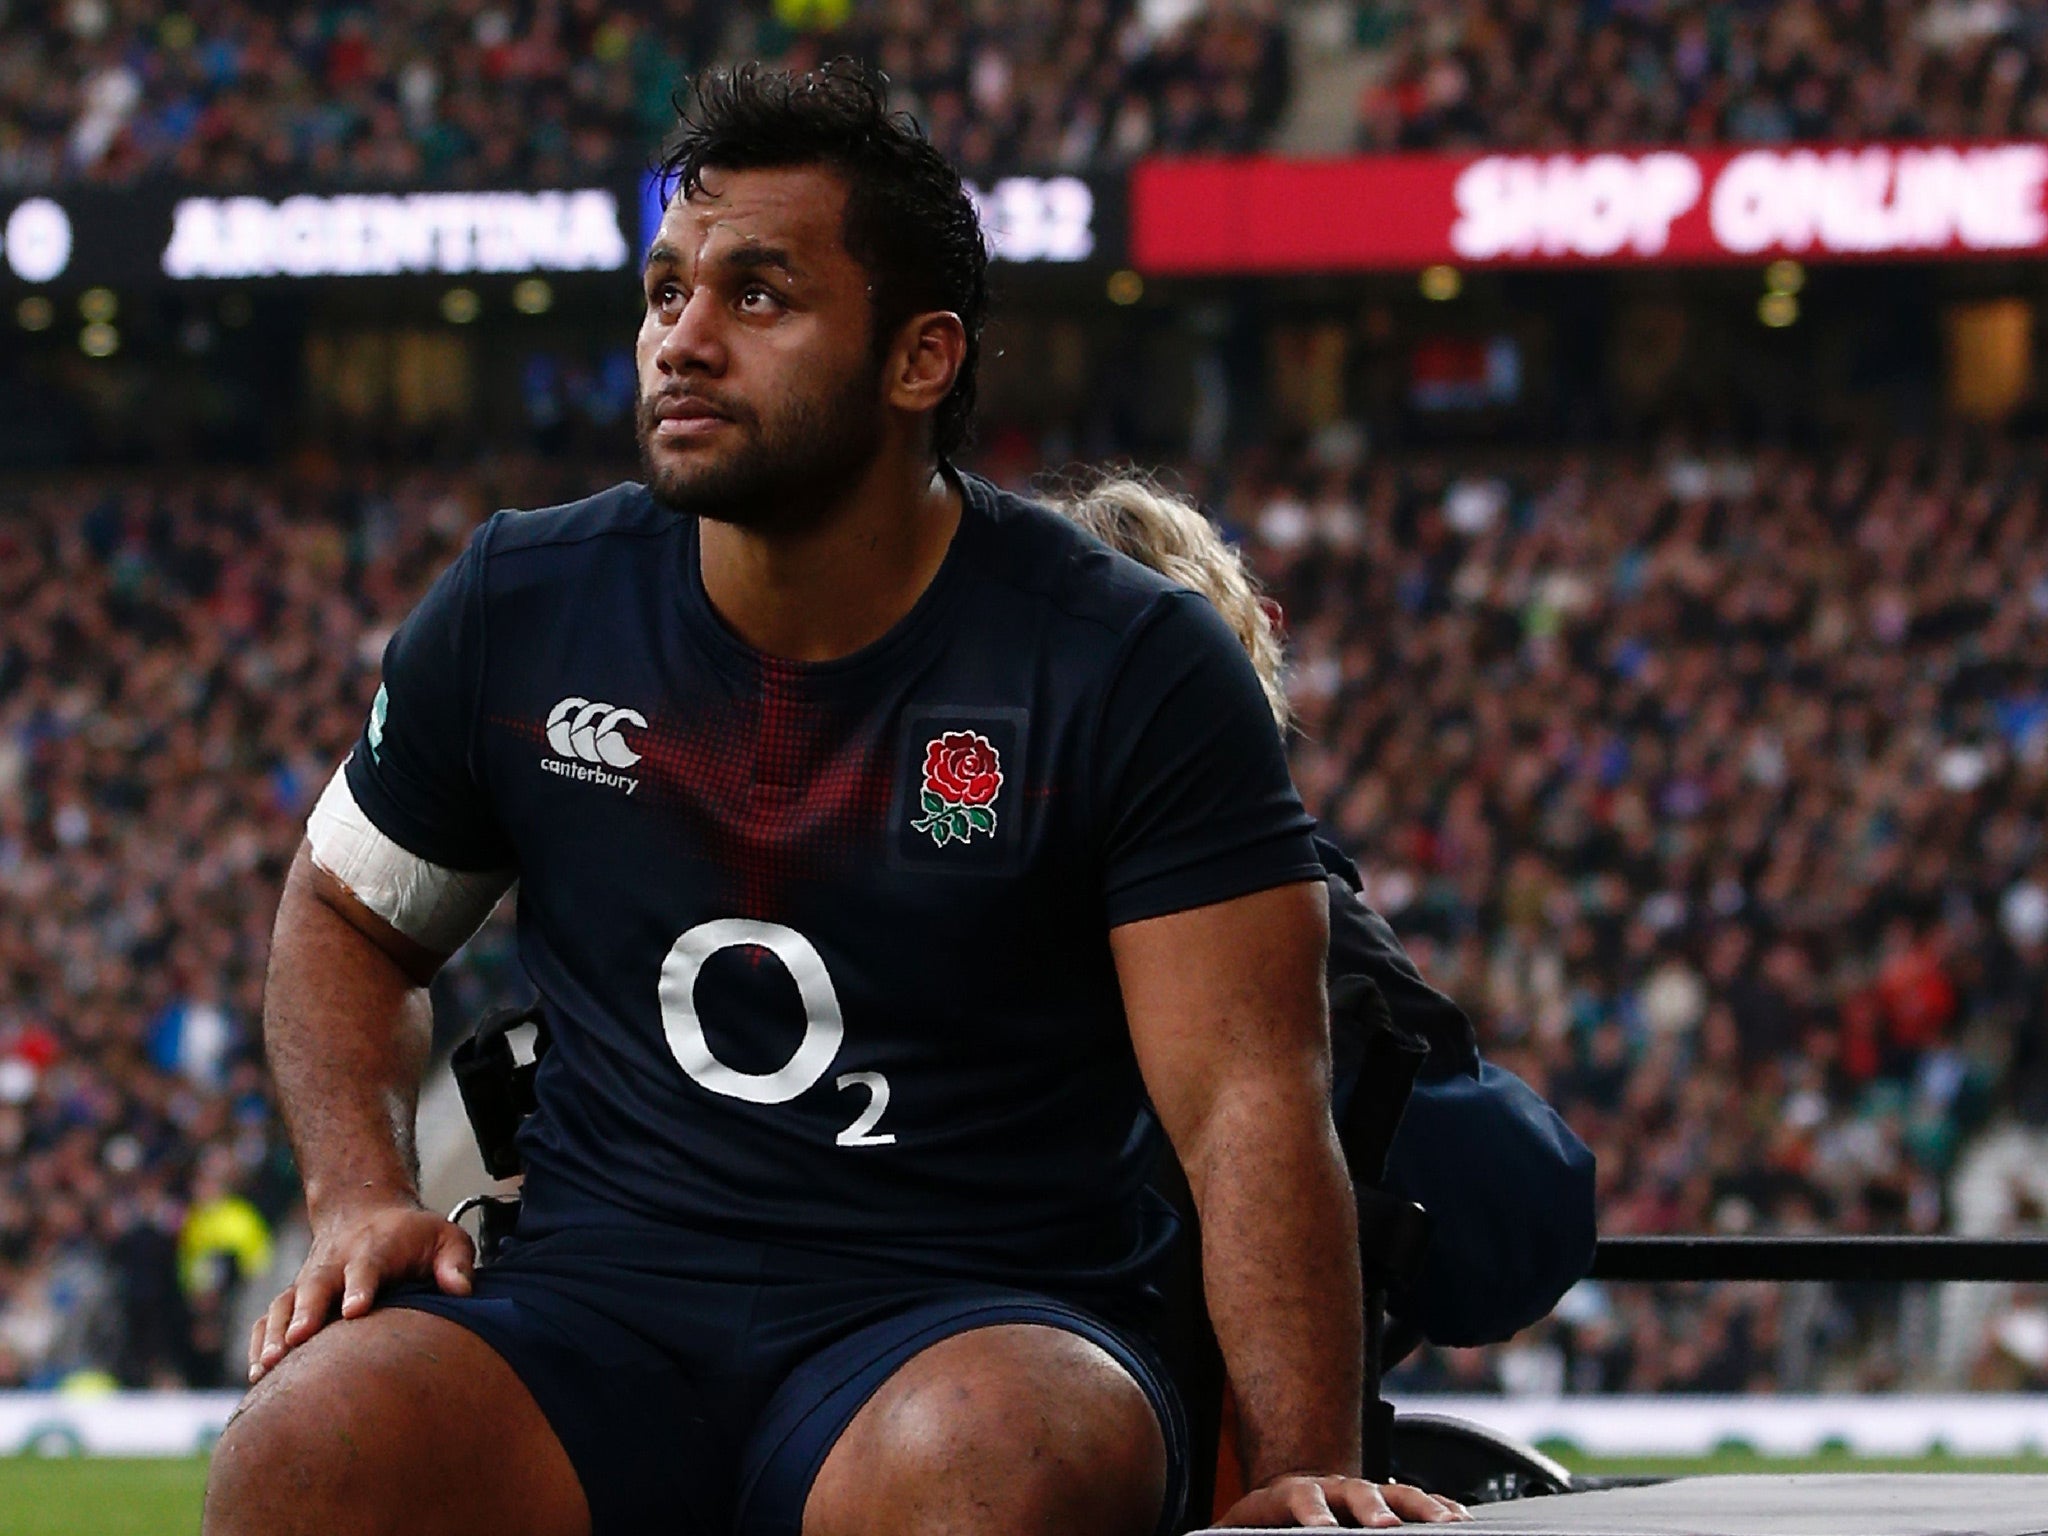 Vunipola was carried off with an injured knee